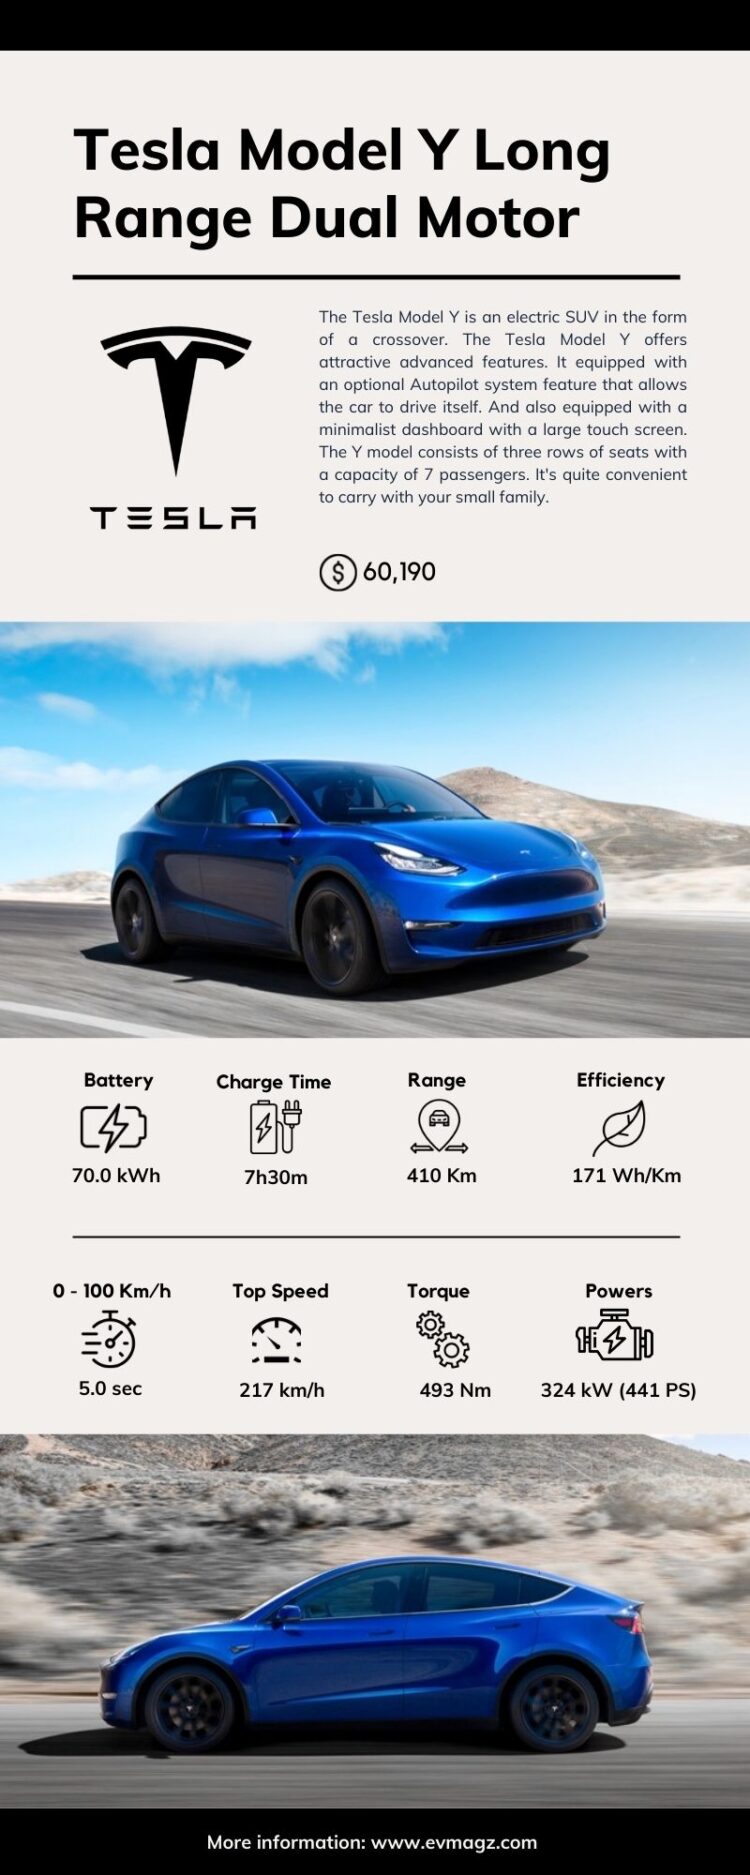 Tesla Model Y Long Range Dual Motor Price and Specifications Infographic